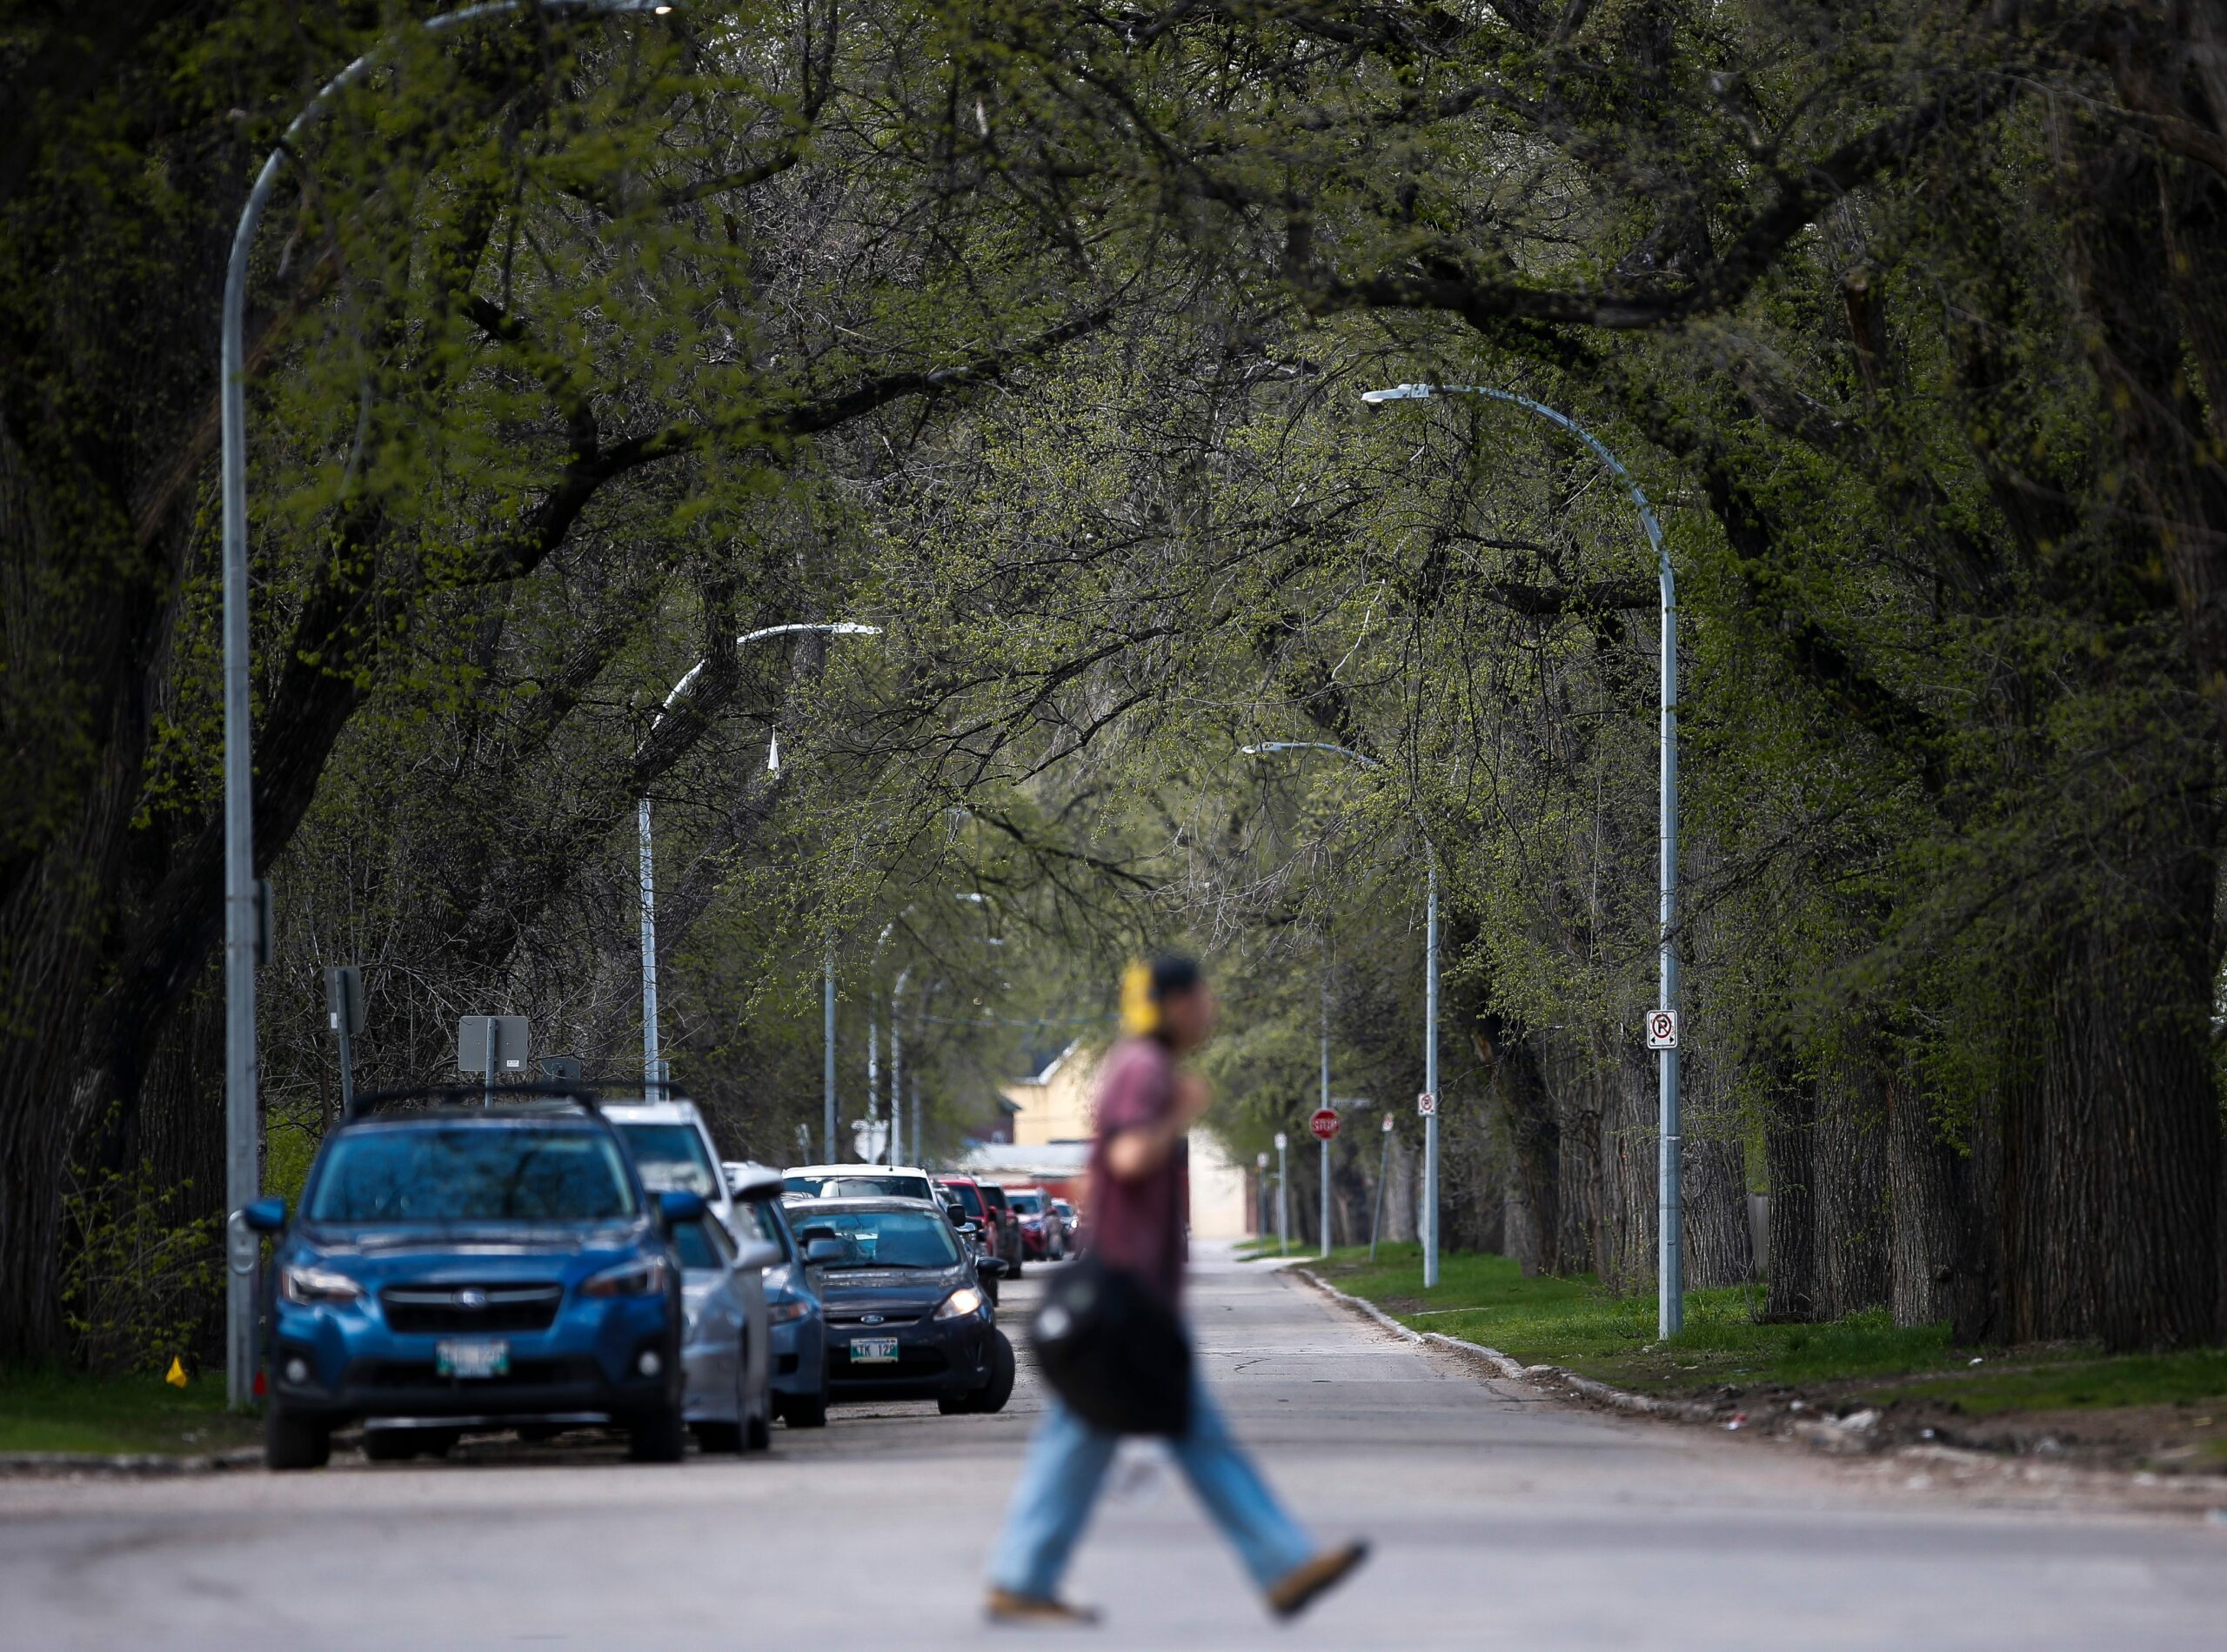 A blurry figure crosses a Winnipeg street under the arched tree canopy